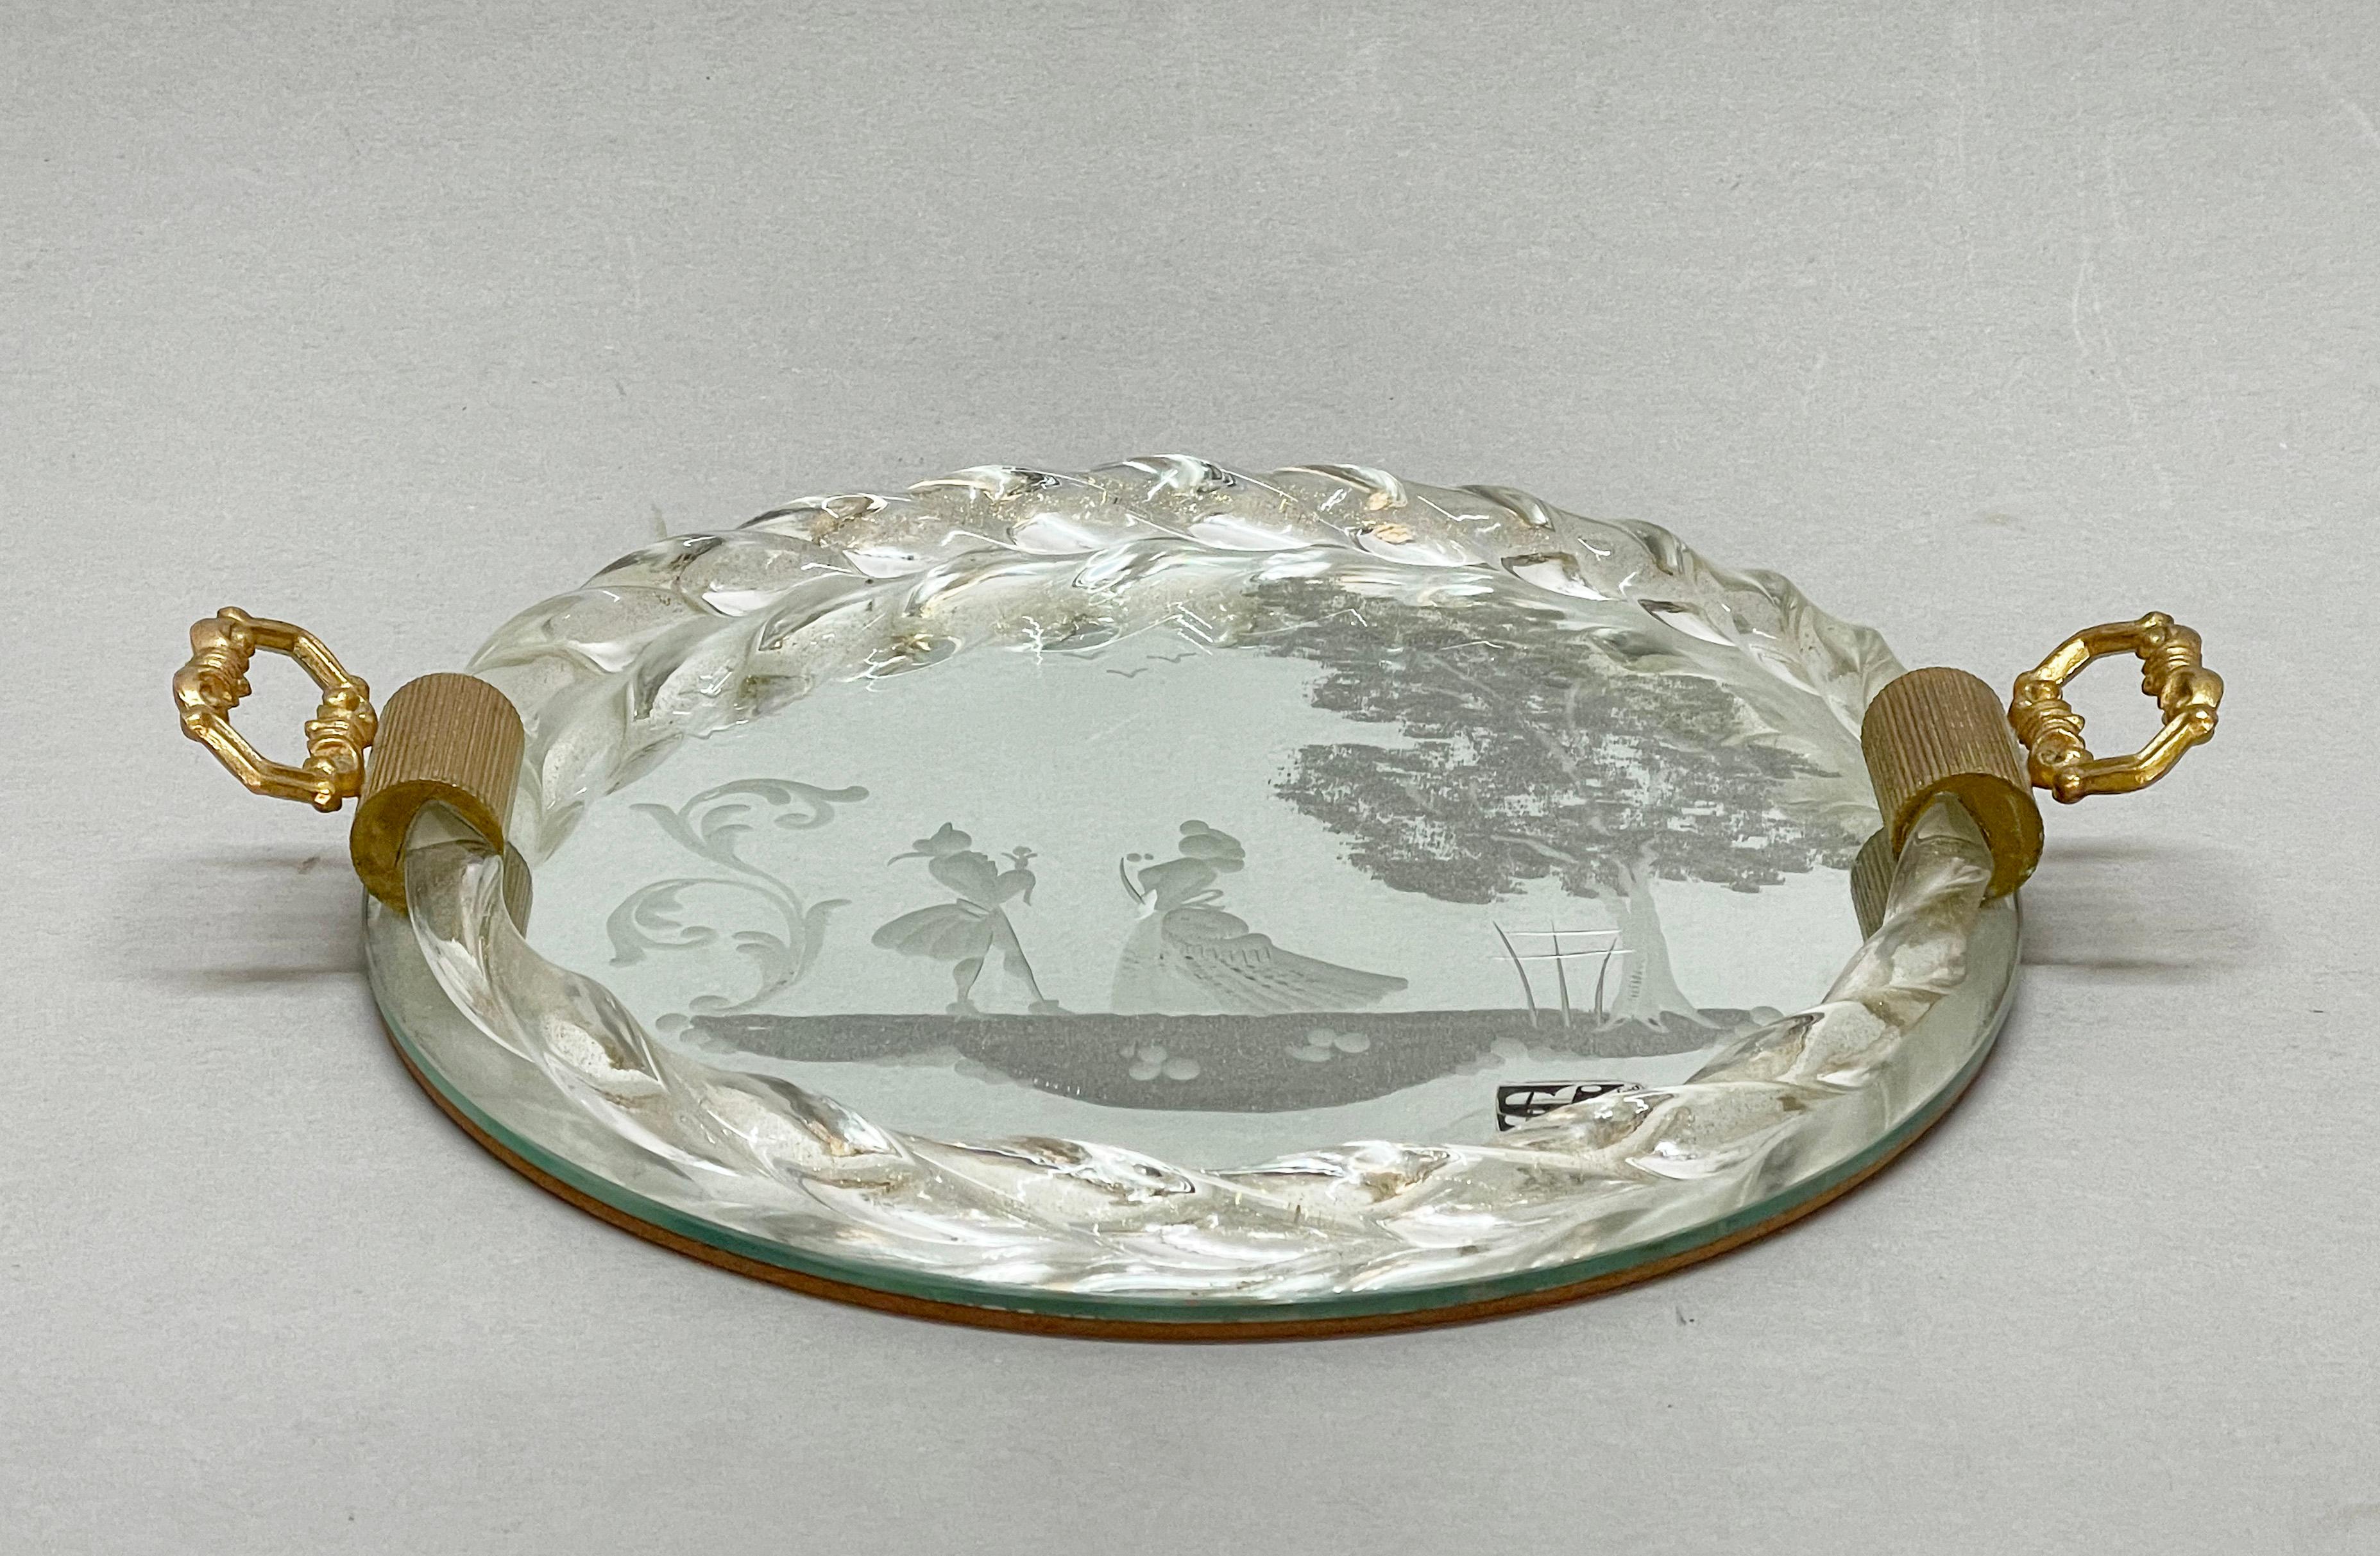 Ongaro e Fuga Gilded Engraved Mirror and Murano Glass Italian Serving Tray 1950s For Sale 1